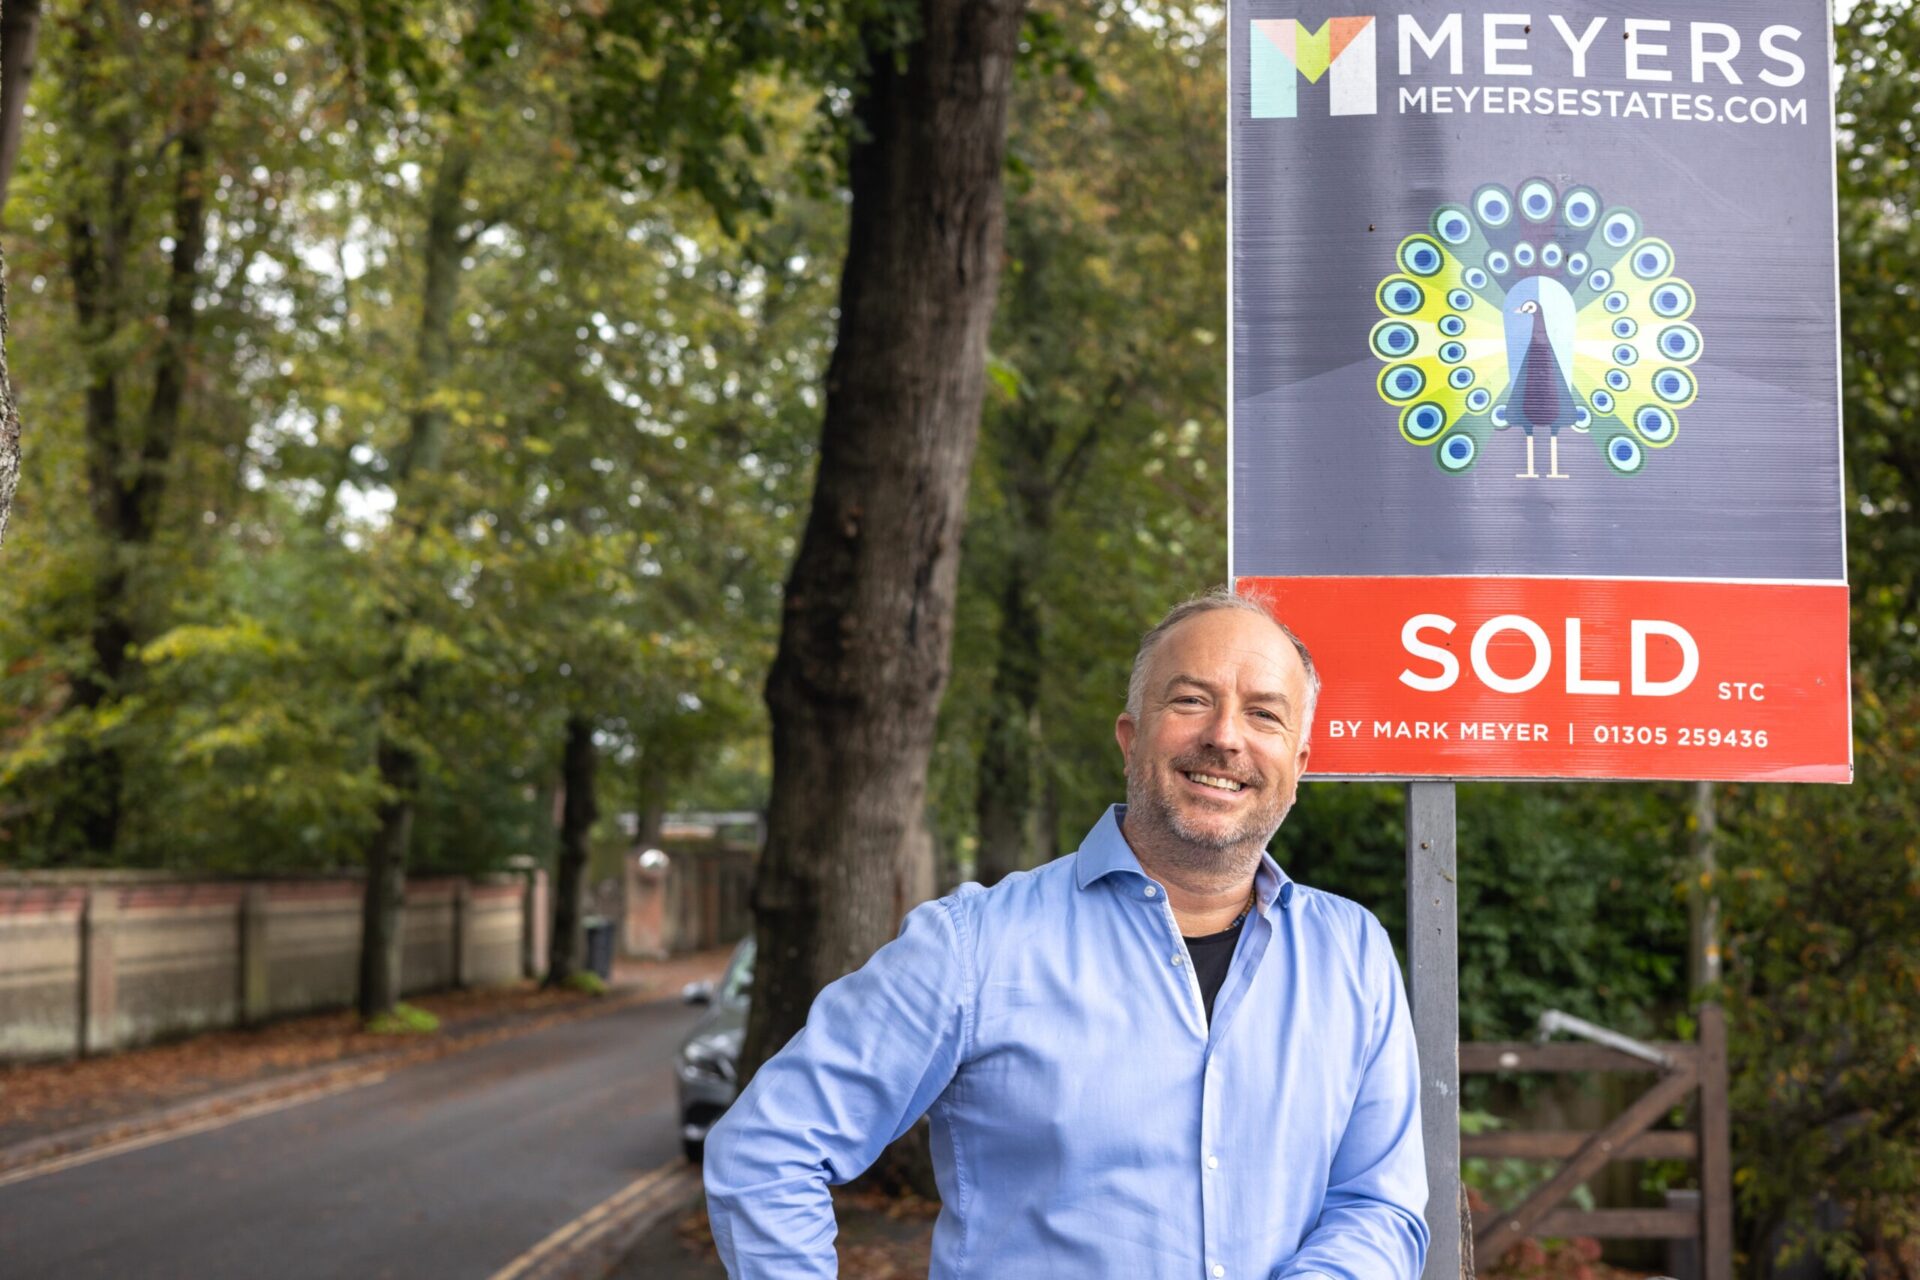 New Year, New Franchise Offer from Meyers Estate Agents